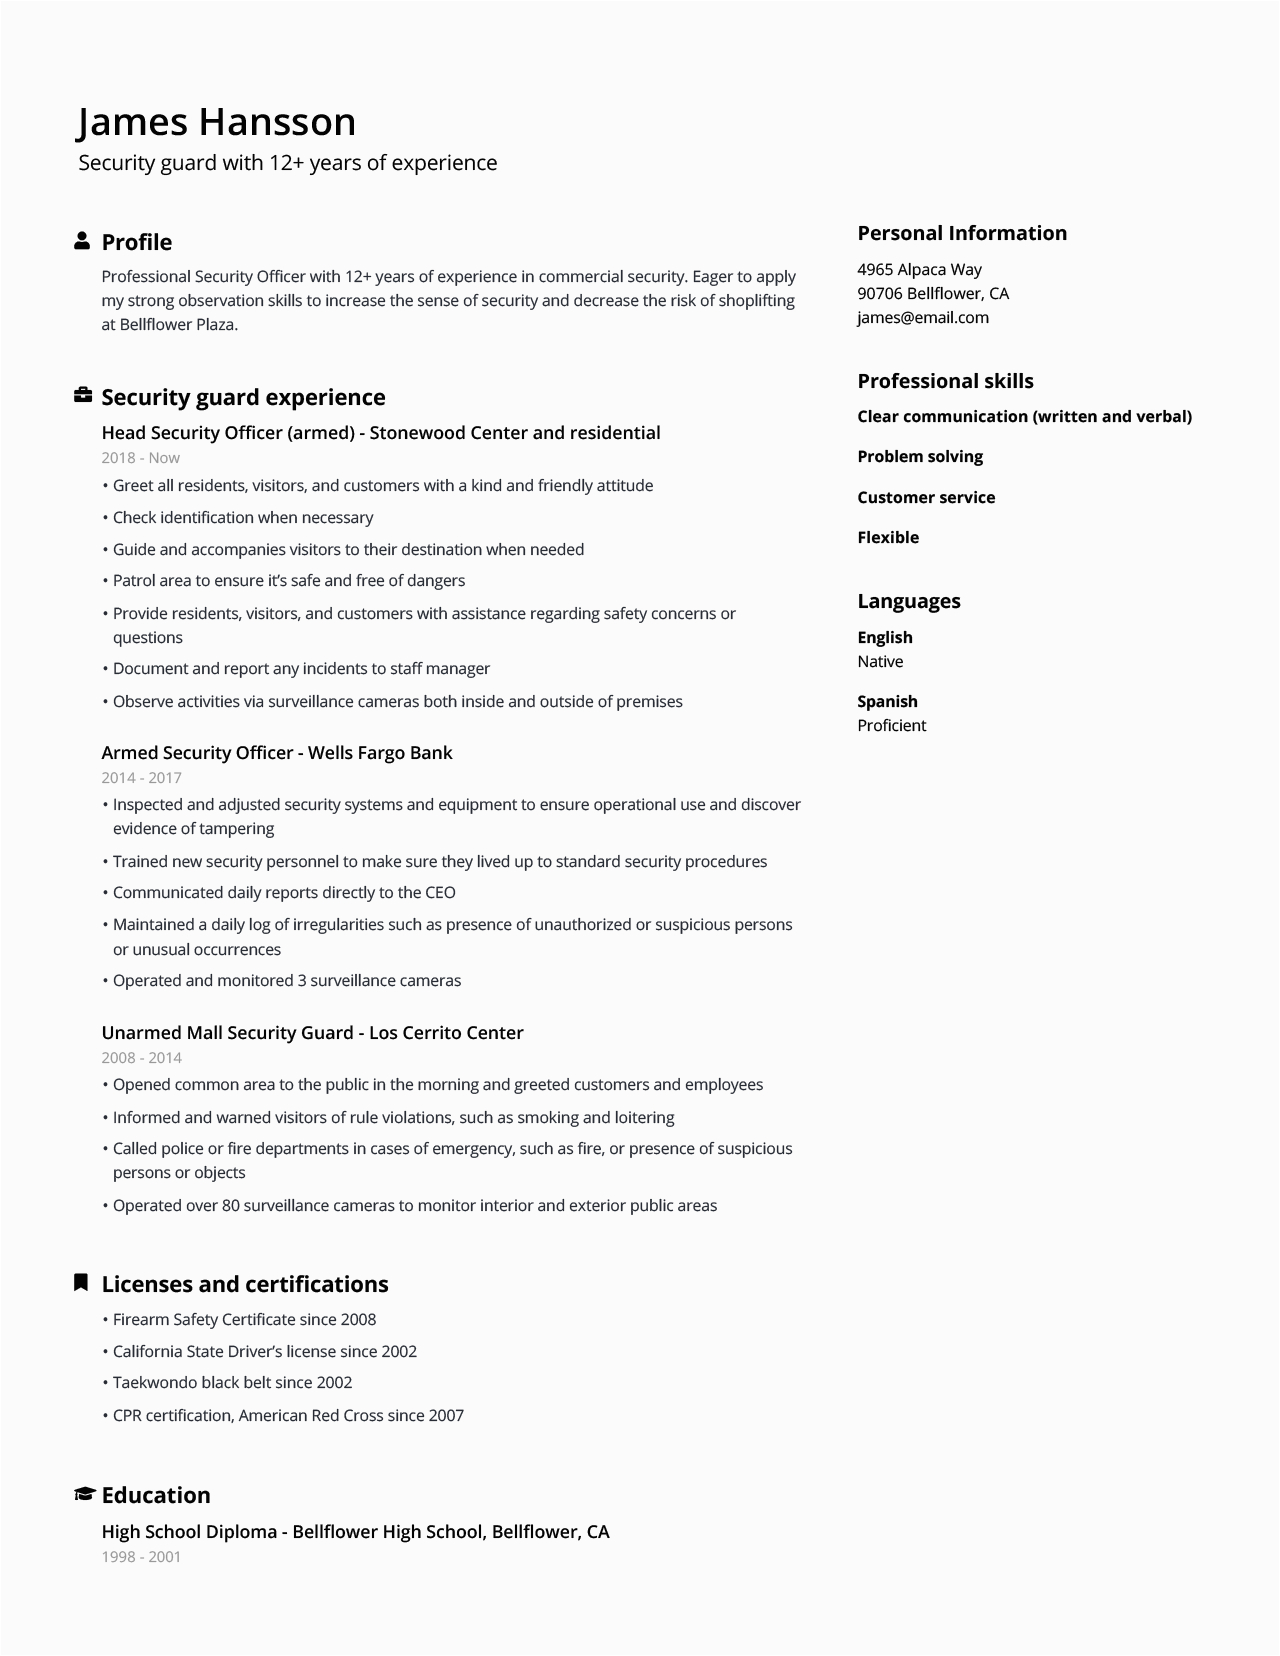 Free Sample Of Resume for Security Guard Security Guard Resume Example [guide] Jofibo